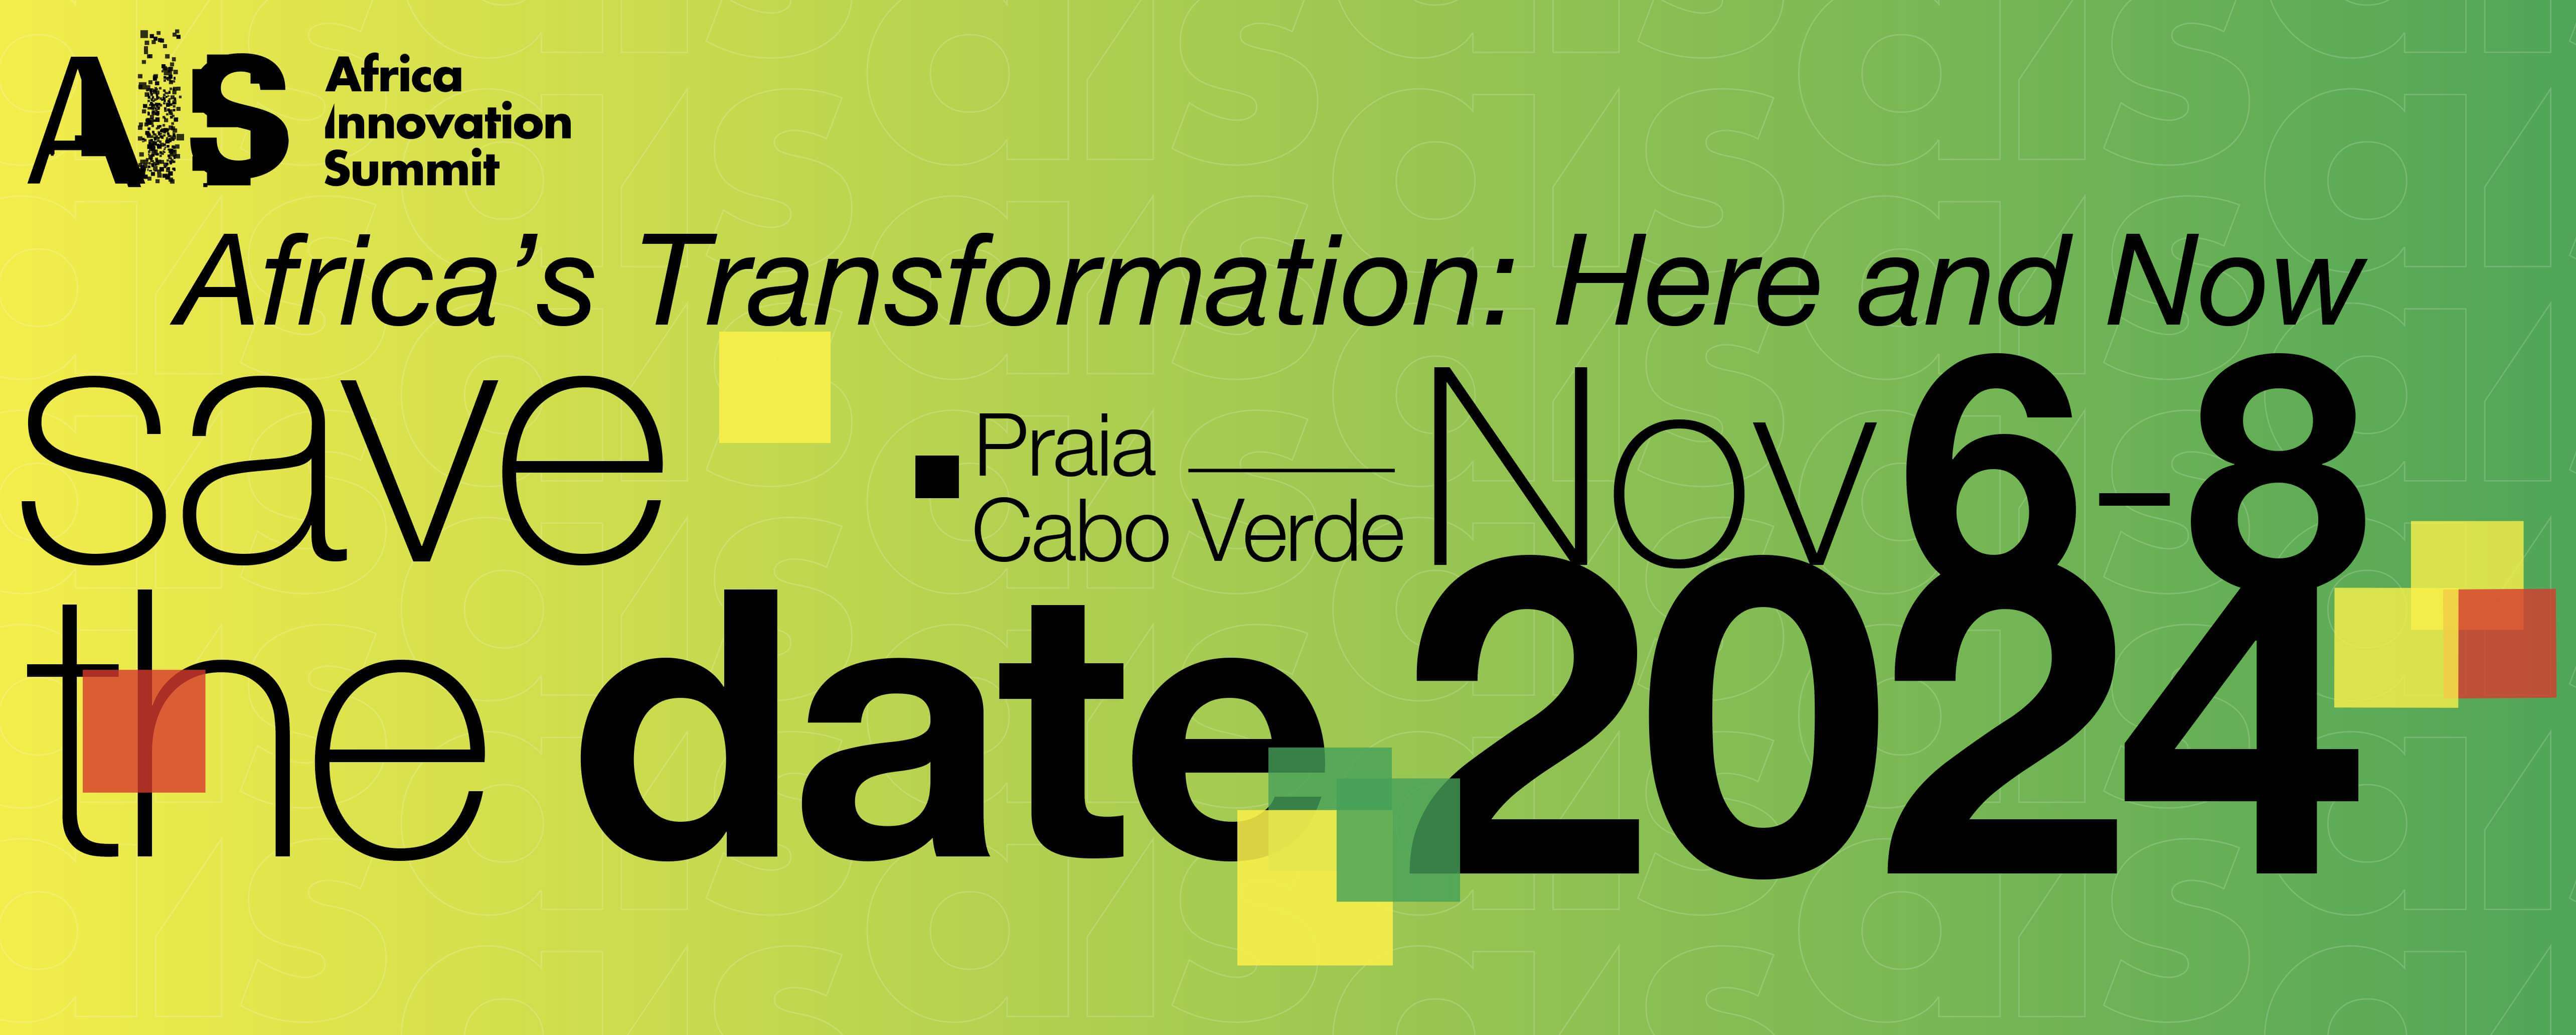 AIS 2024 - Africa's Transformation: Here and Now